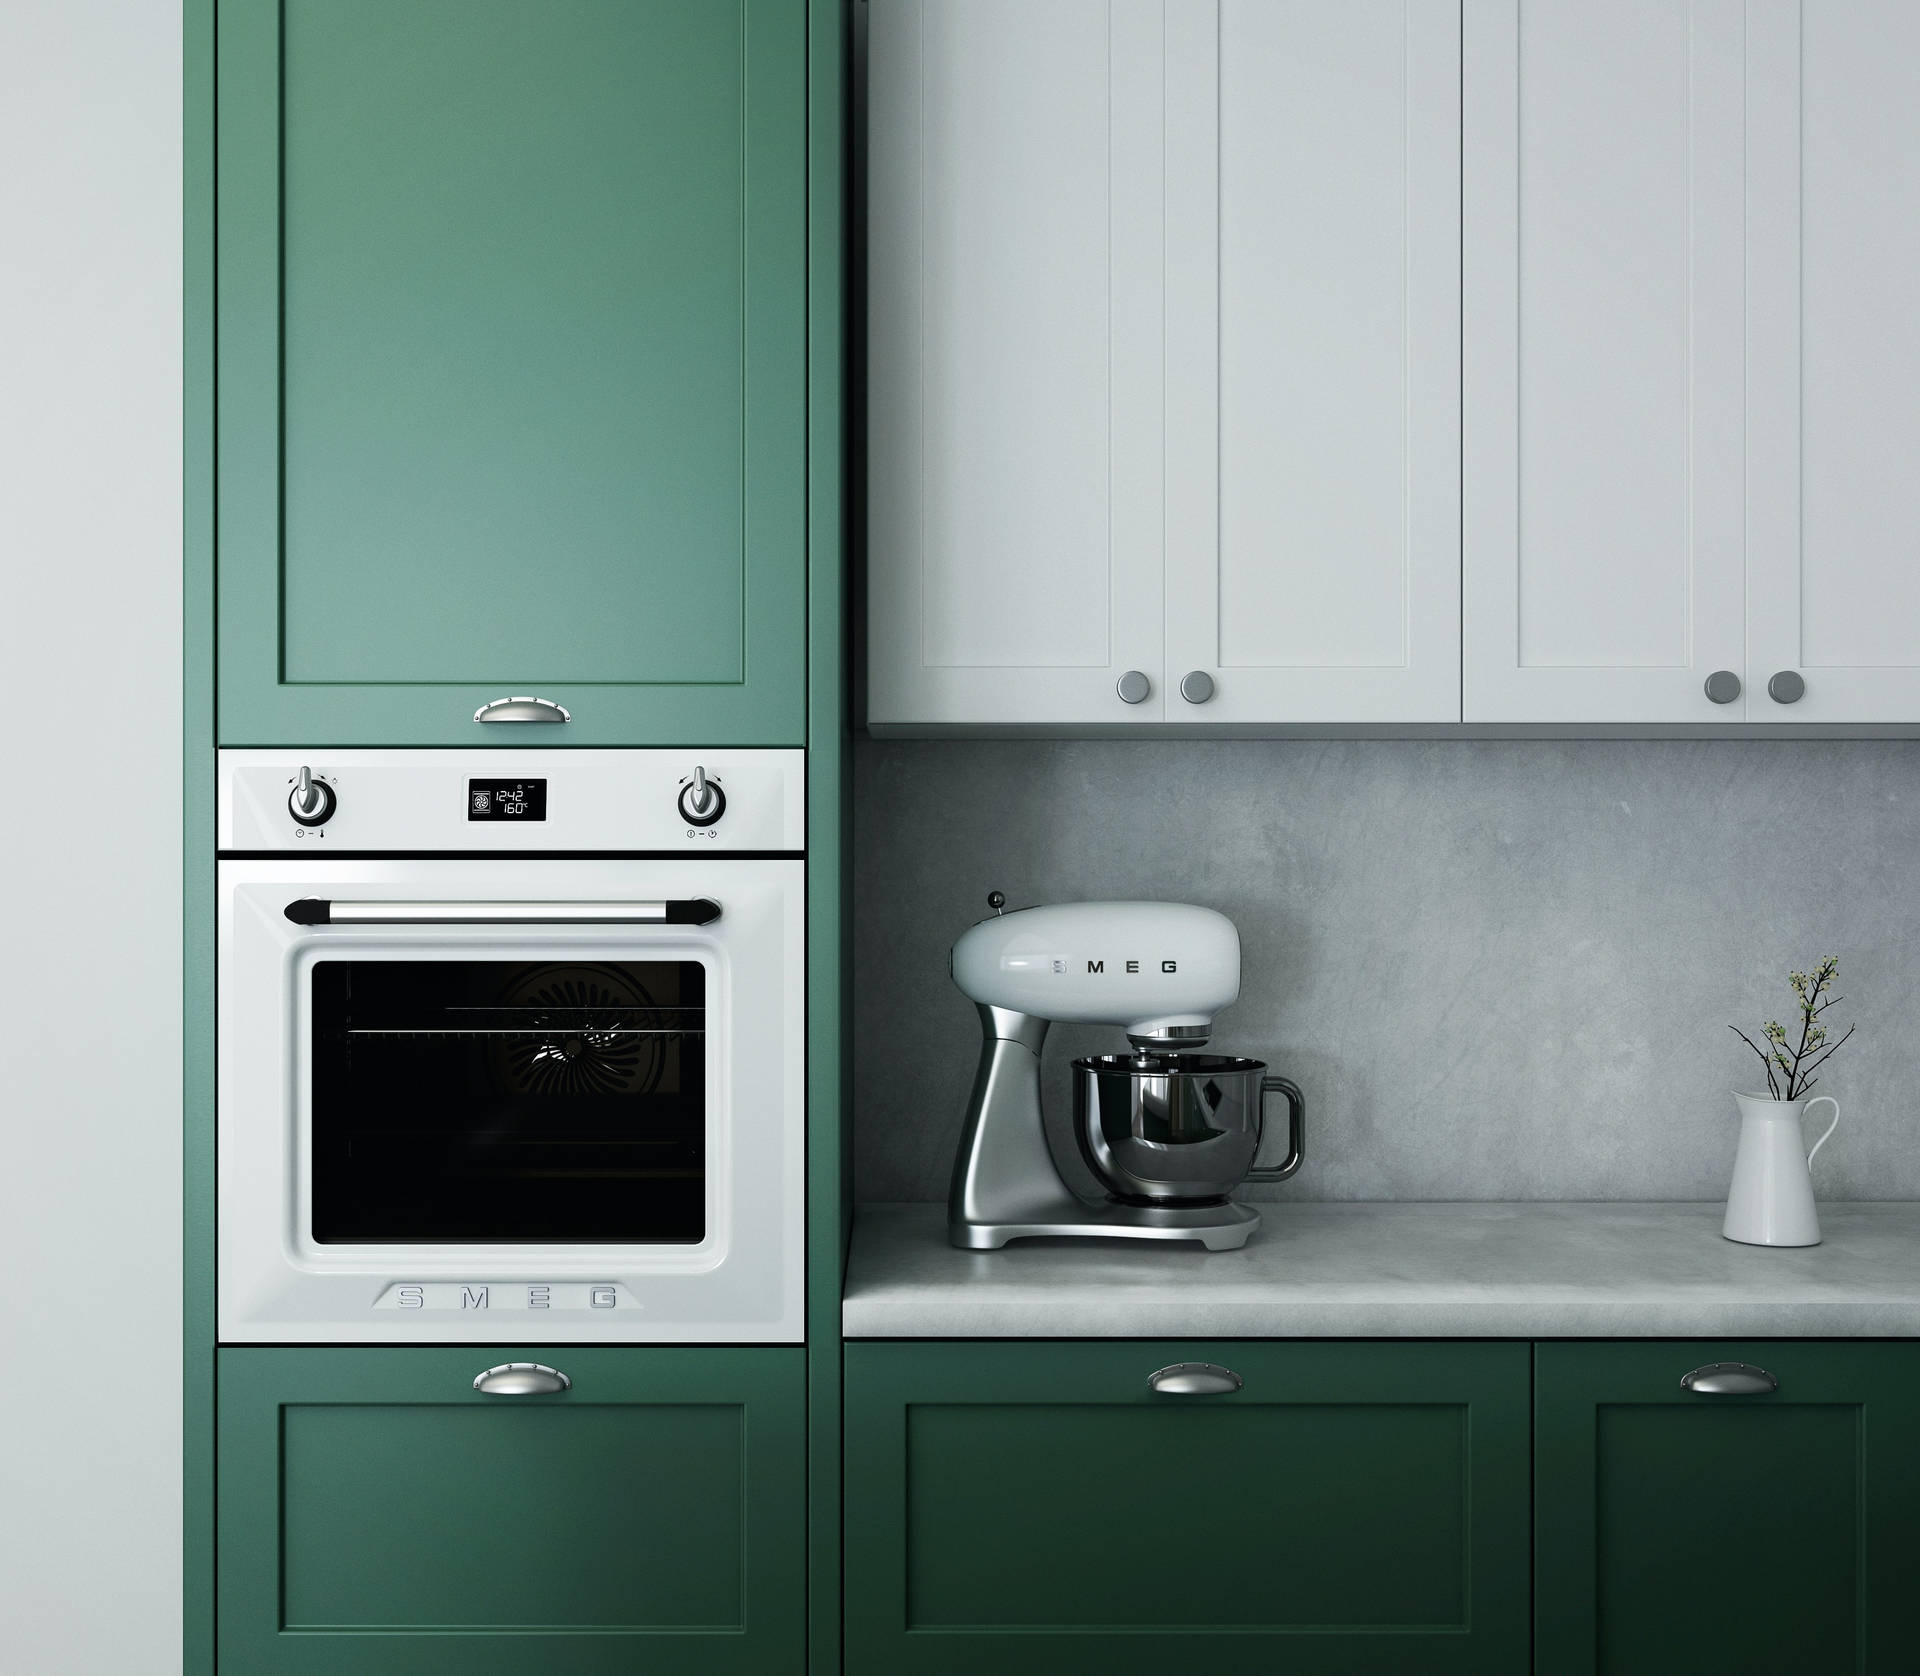 Matted Green And White Kitchen Wallpaper